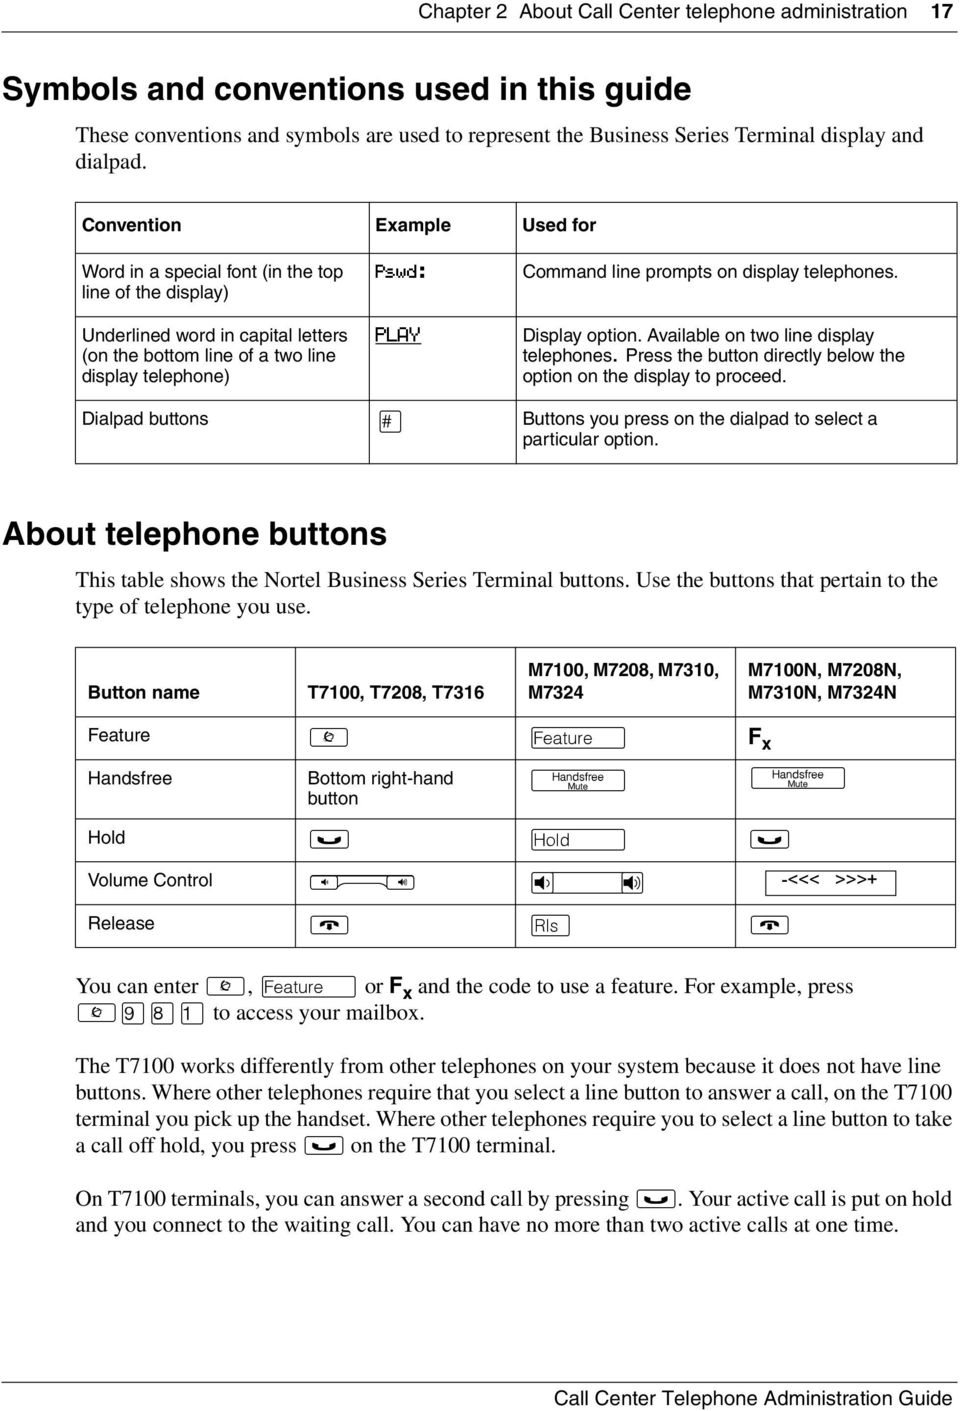 on display telephones. Display option. Available on two line display telephones. Press the button directly below the option on the display to proceed.